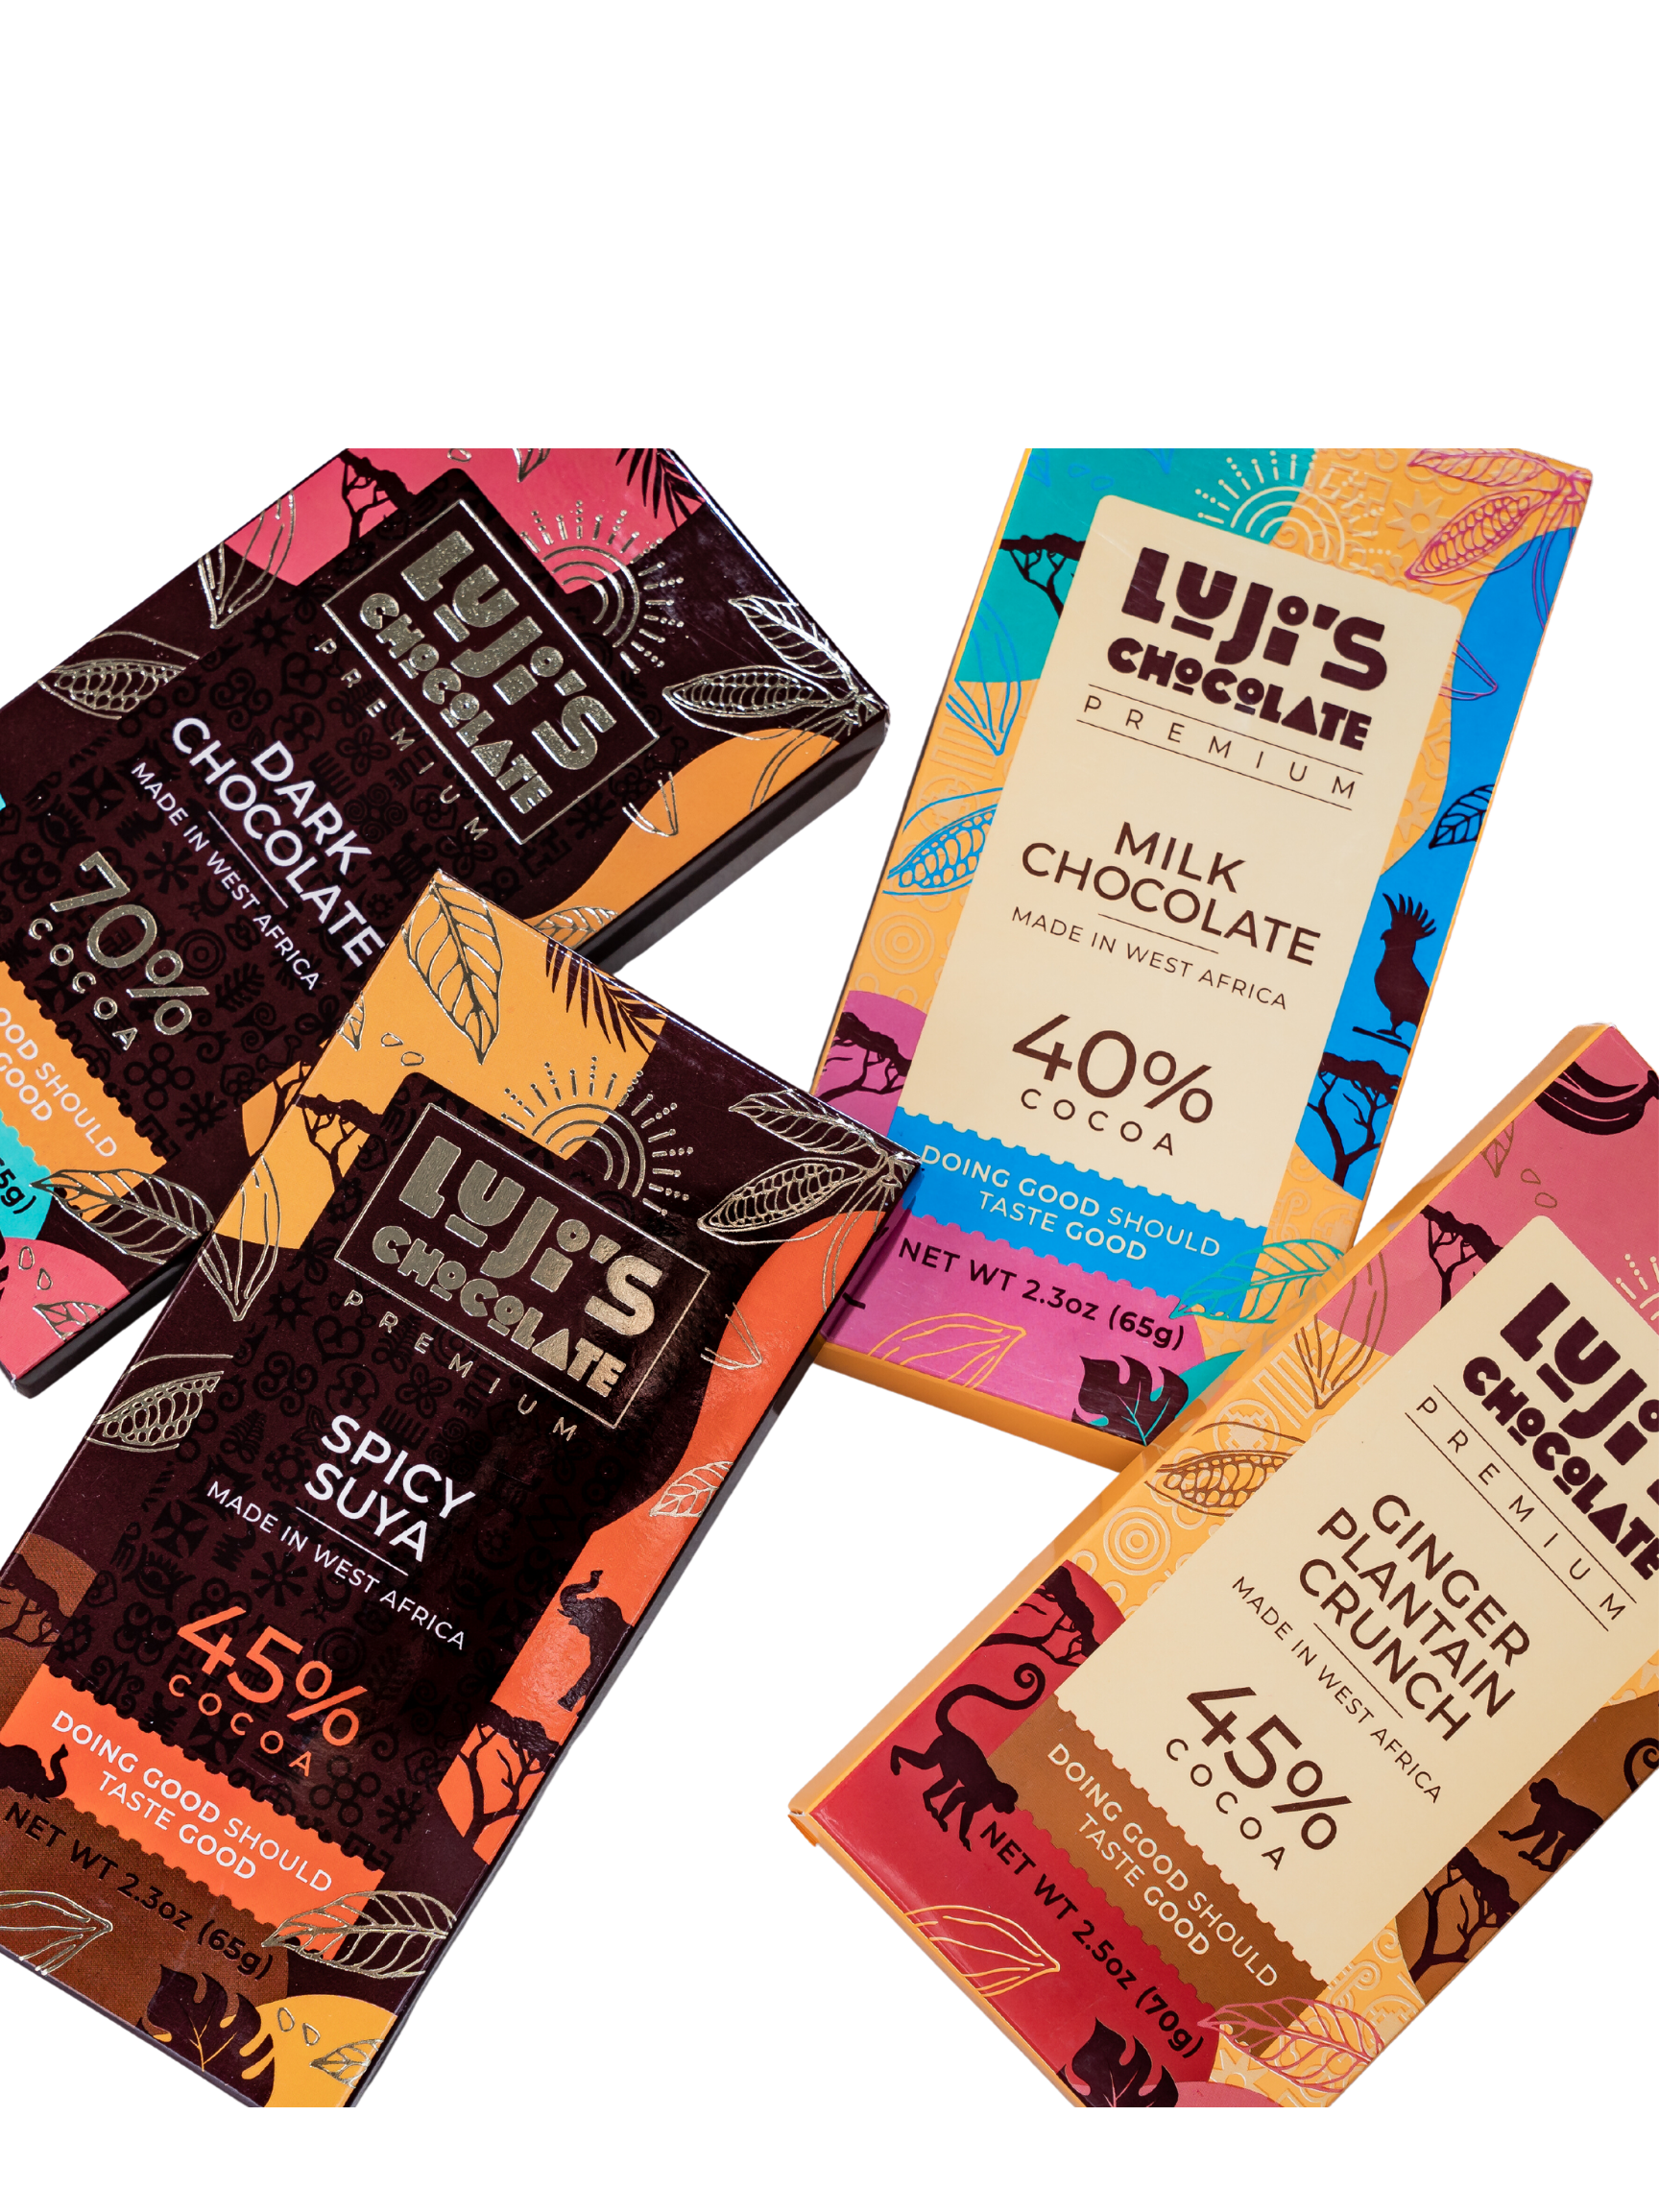 all Luji's Chocolate bars, including spicy suya, dark chocolate, milk chocolate and ginger plantain crunch, randomly scatted around showcases the bright colors on each bar  